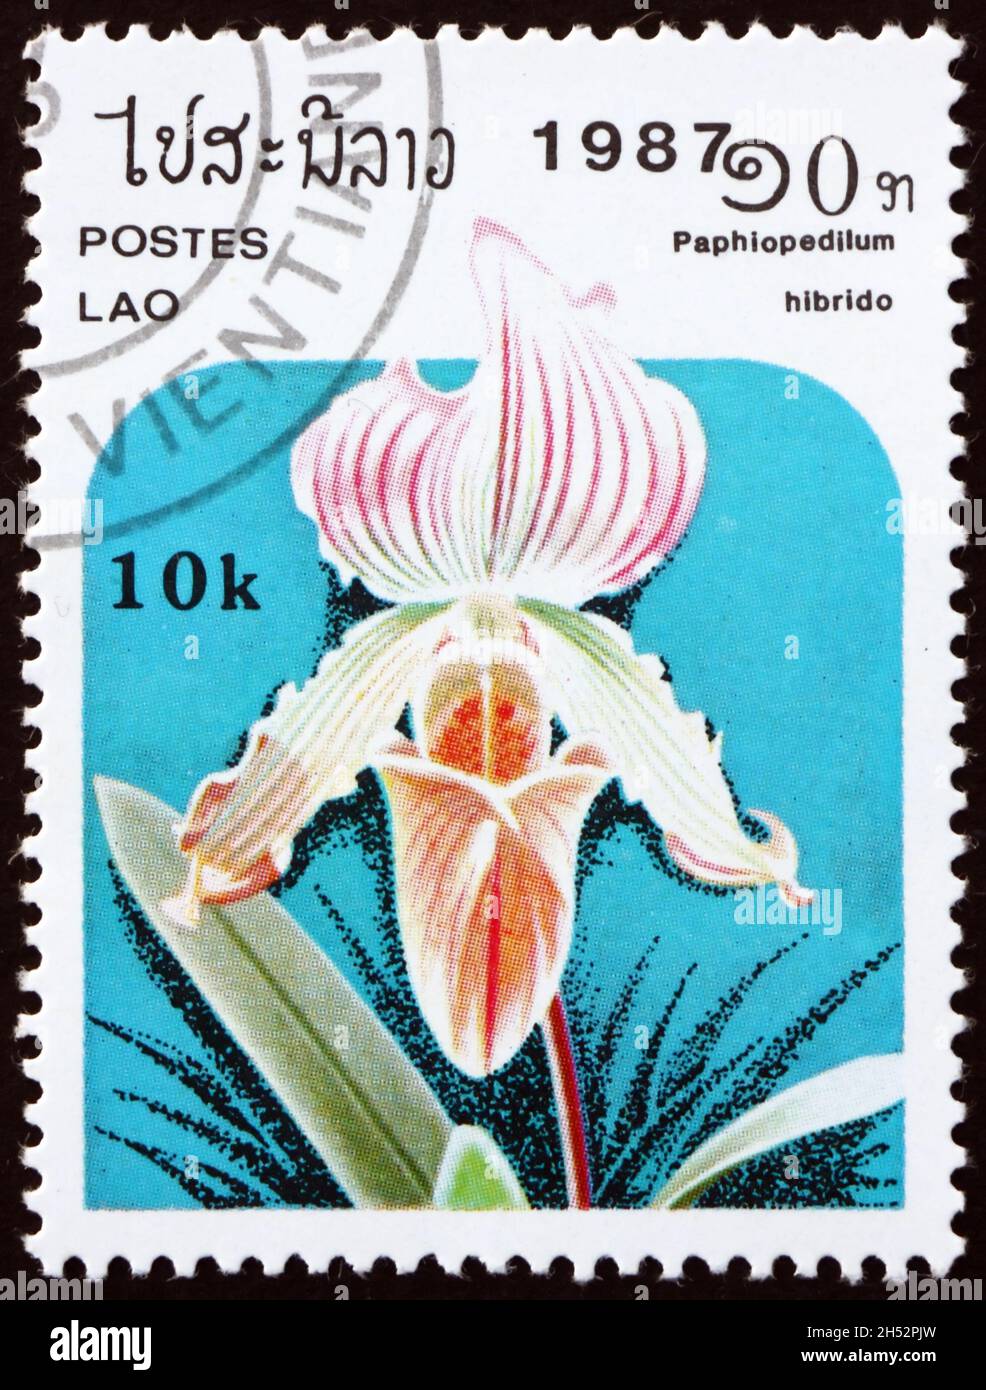 LAOS - CIRCA 1987: a stamp printed in Laos shows the lady slipper orchid, paphiopedilum hibrid, is a species of flowering plant native to Southeast As Stock Photo